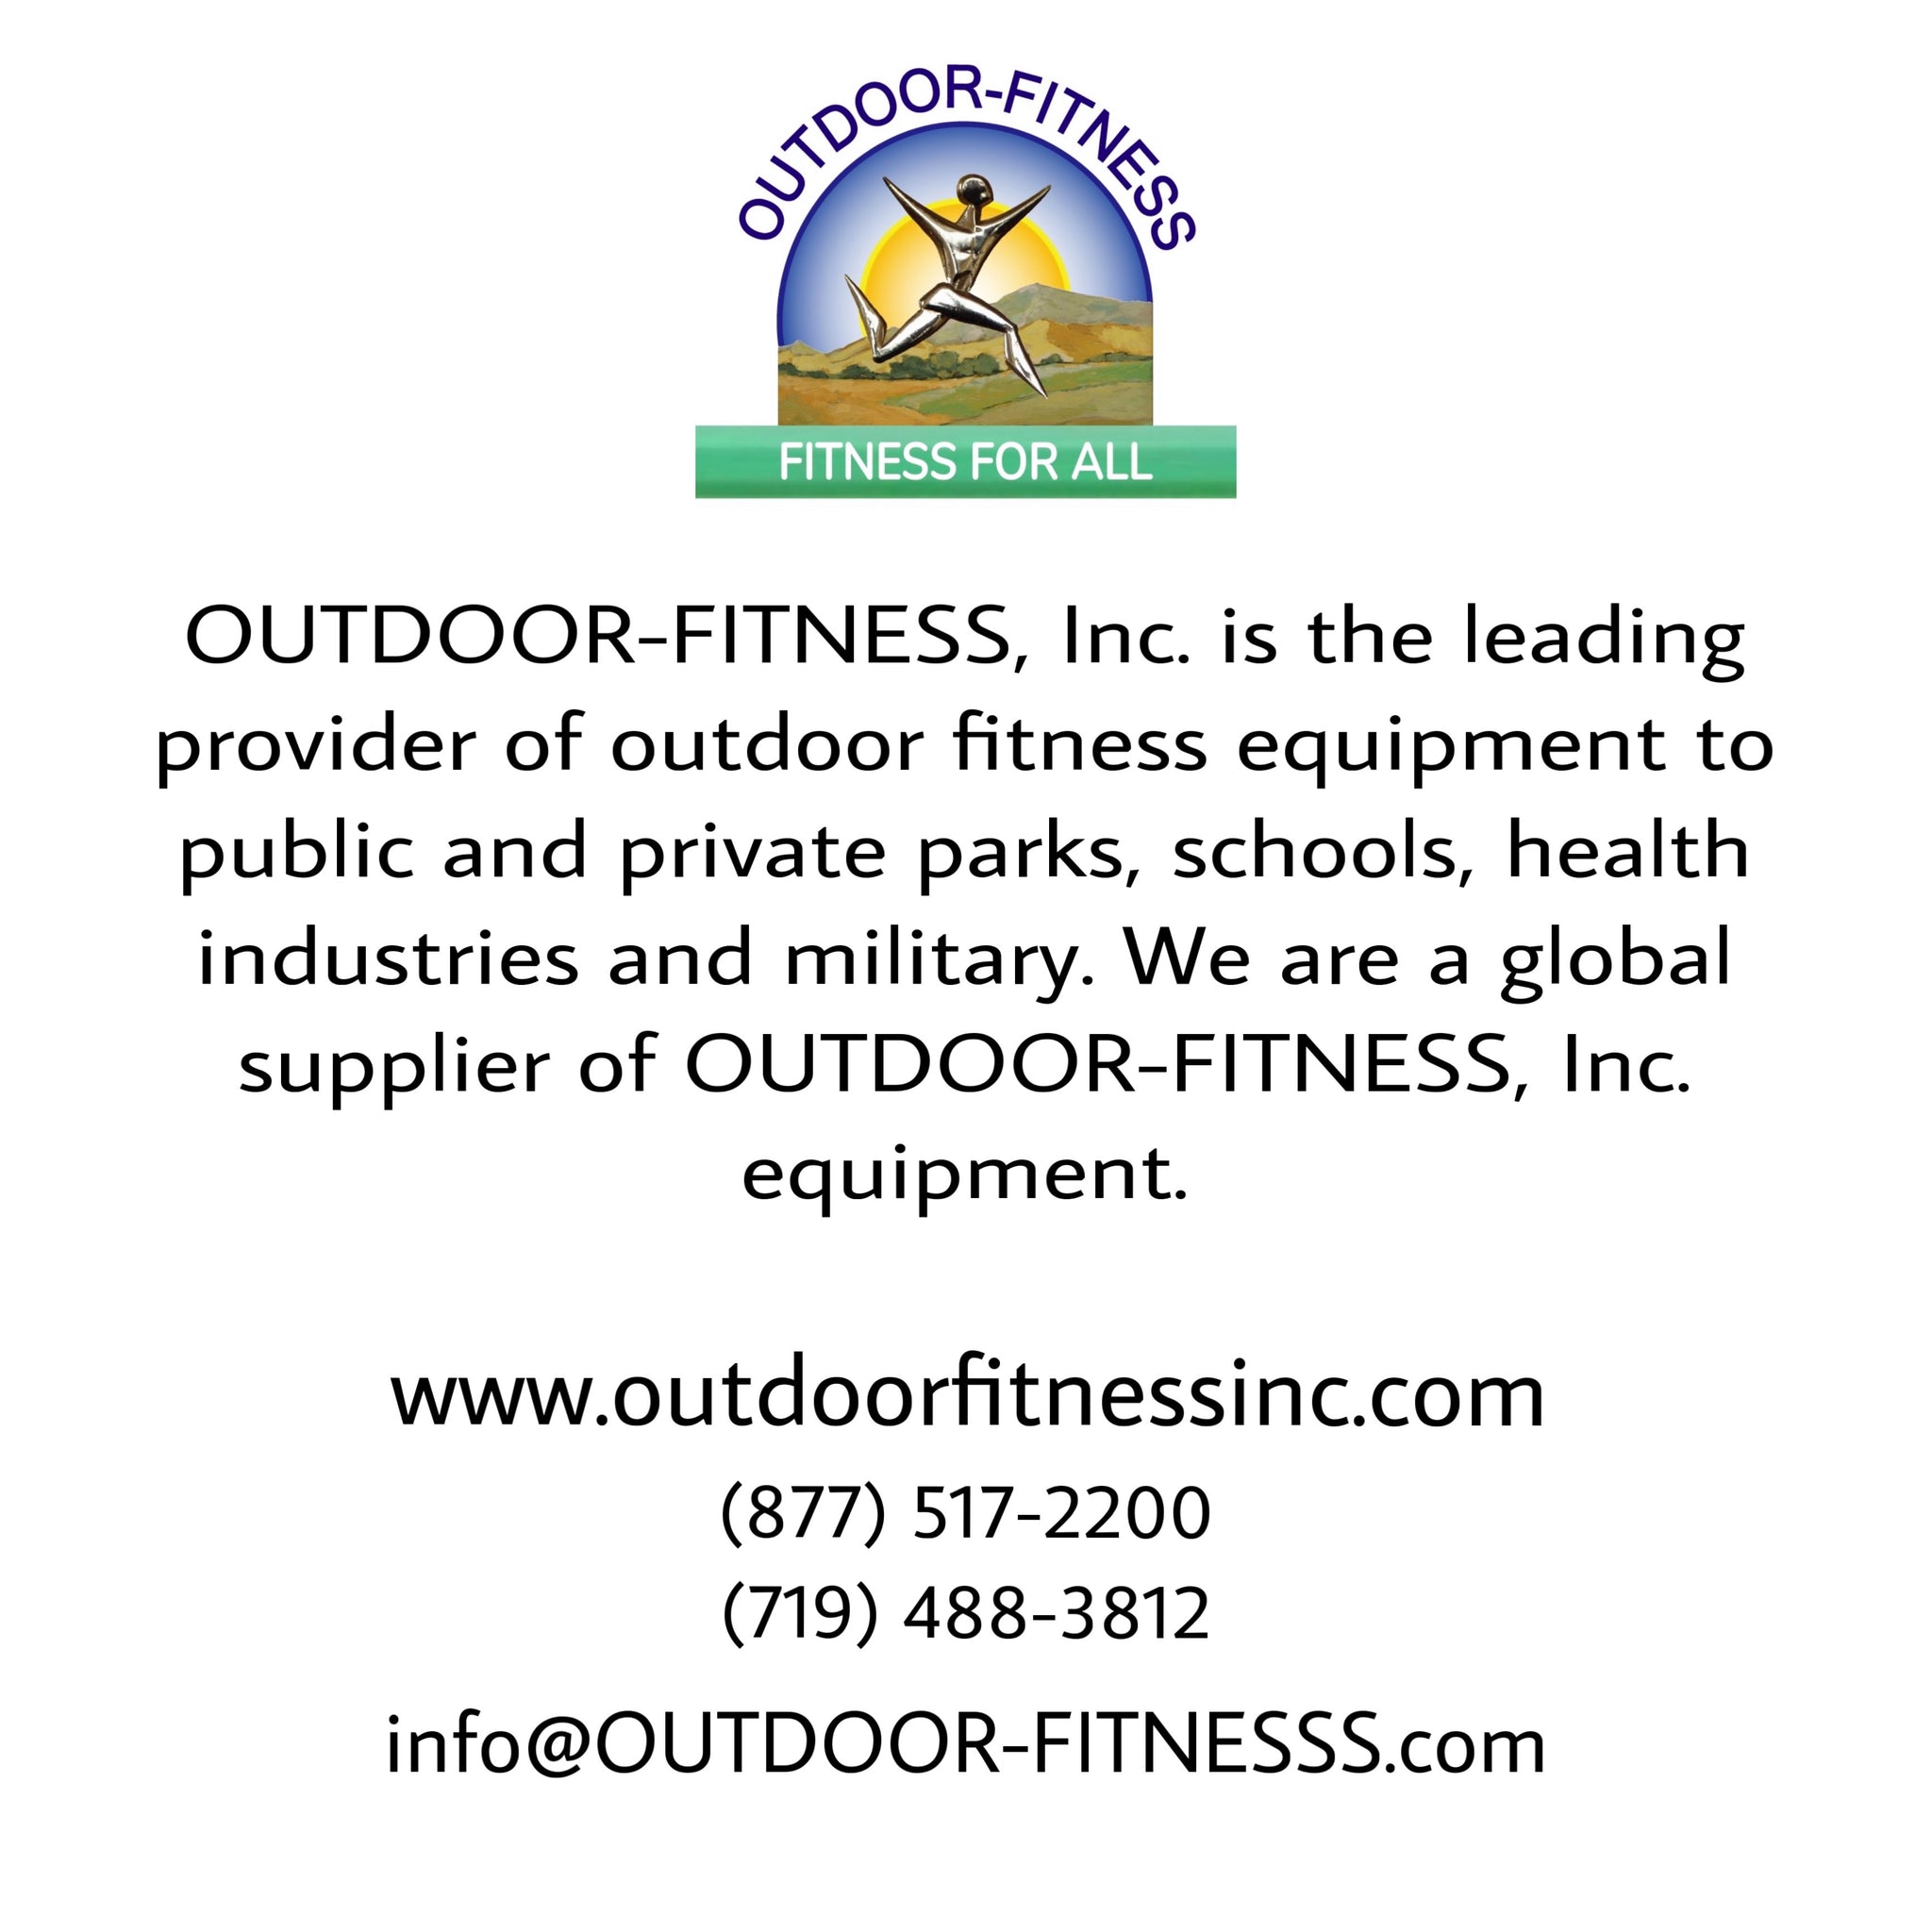 Outdoor-Fitness: The Brand Name and Industry Leader in Outdoor